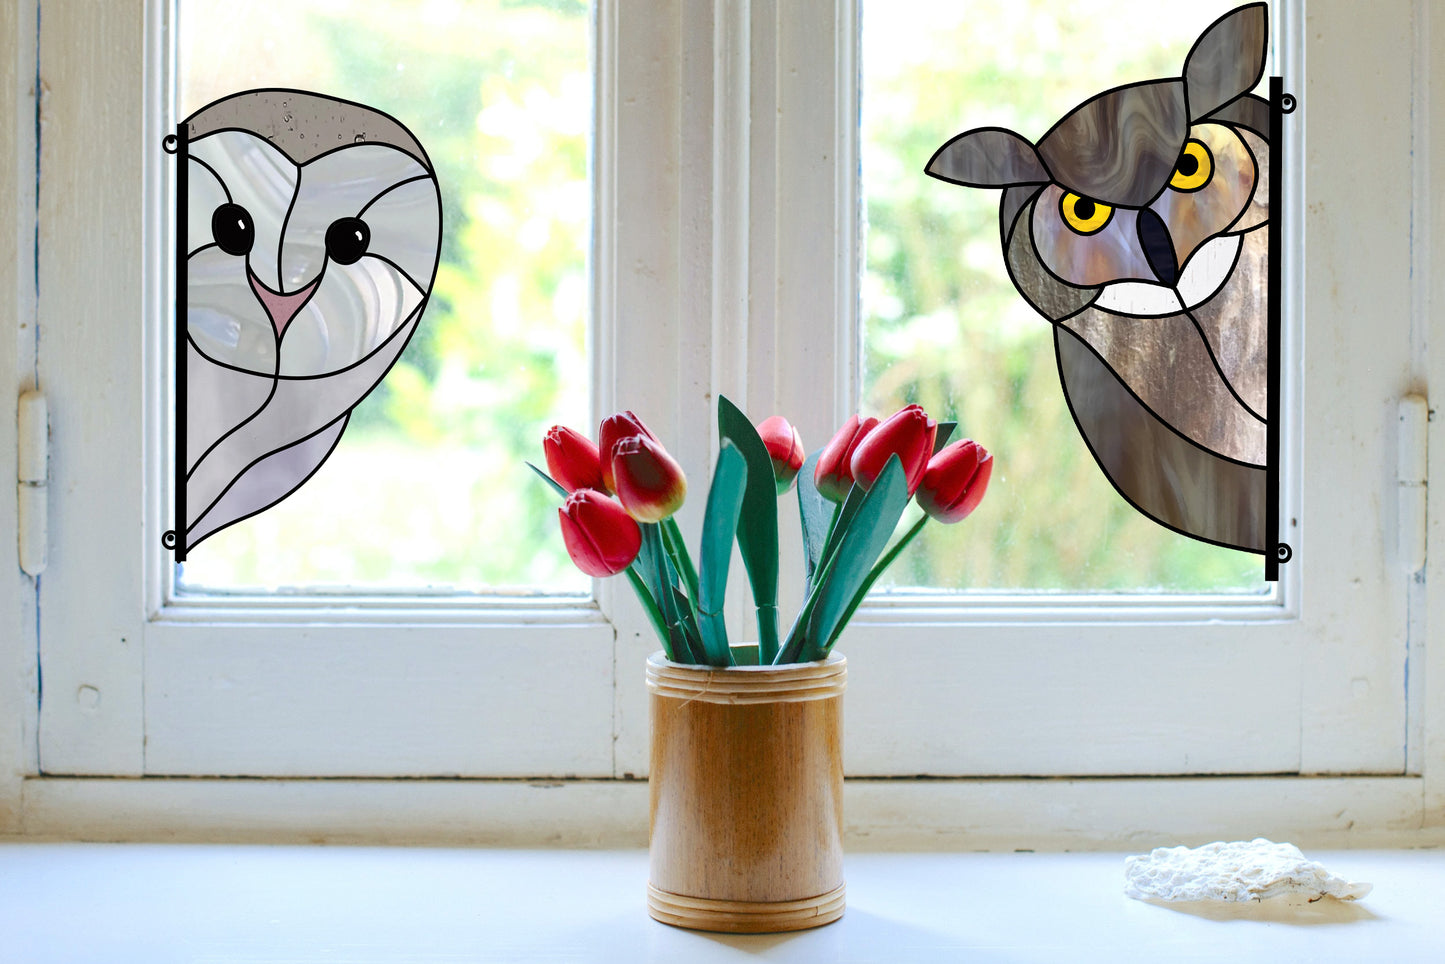 Horned Owl Buddy Stained Glass Pattern